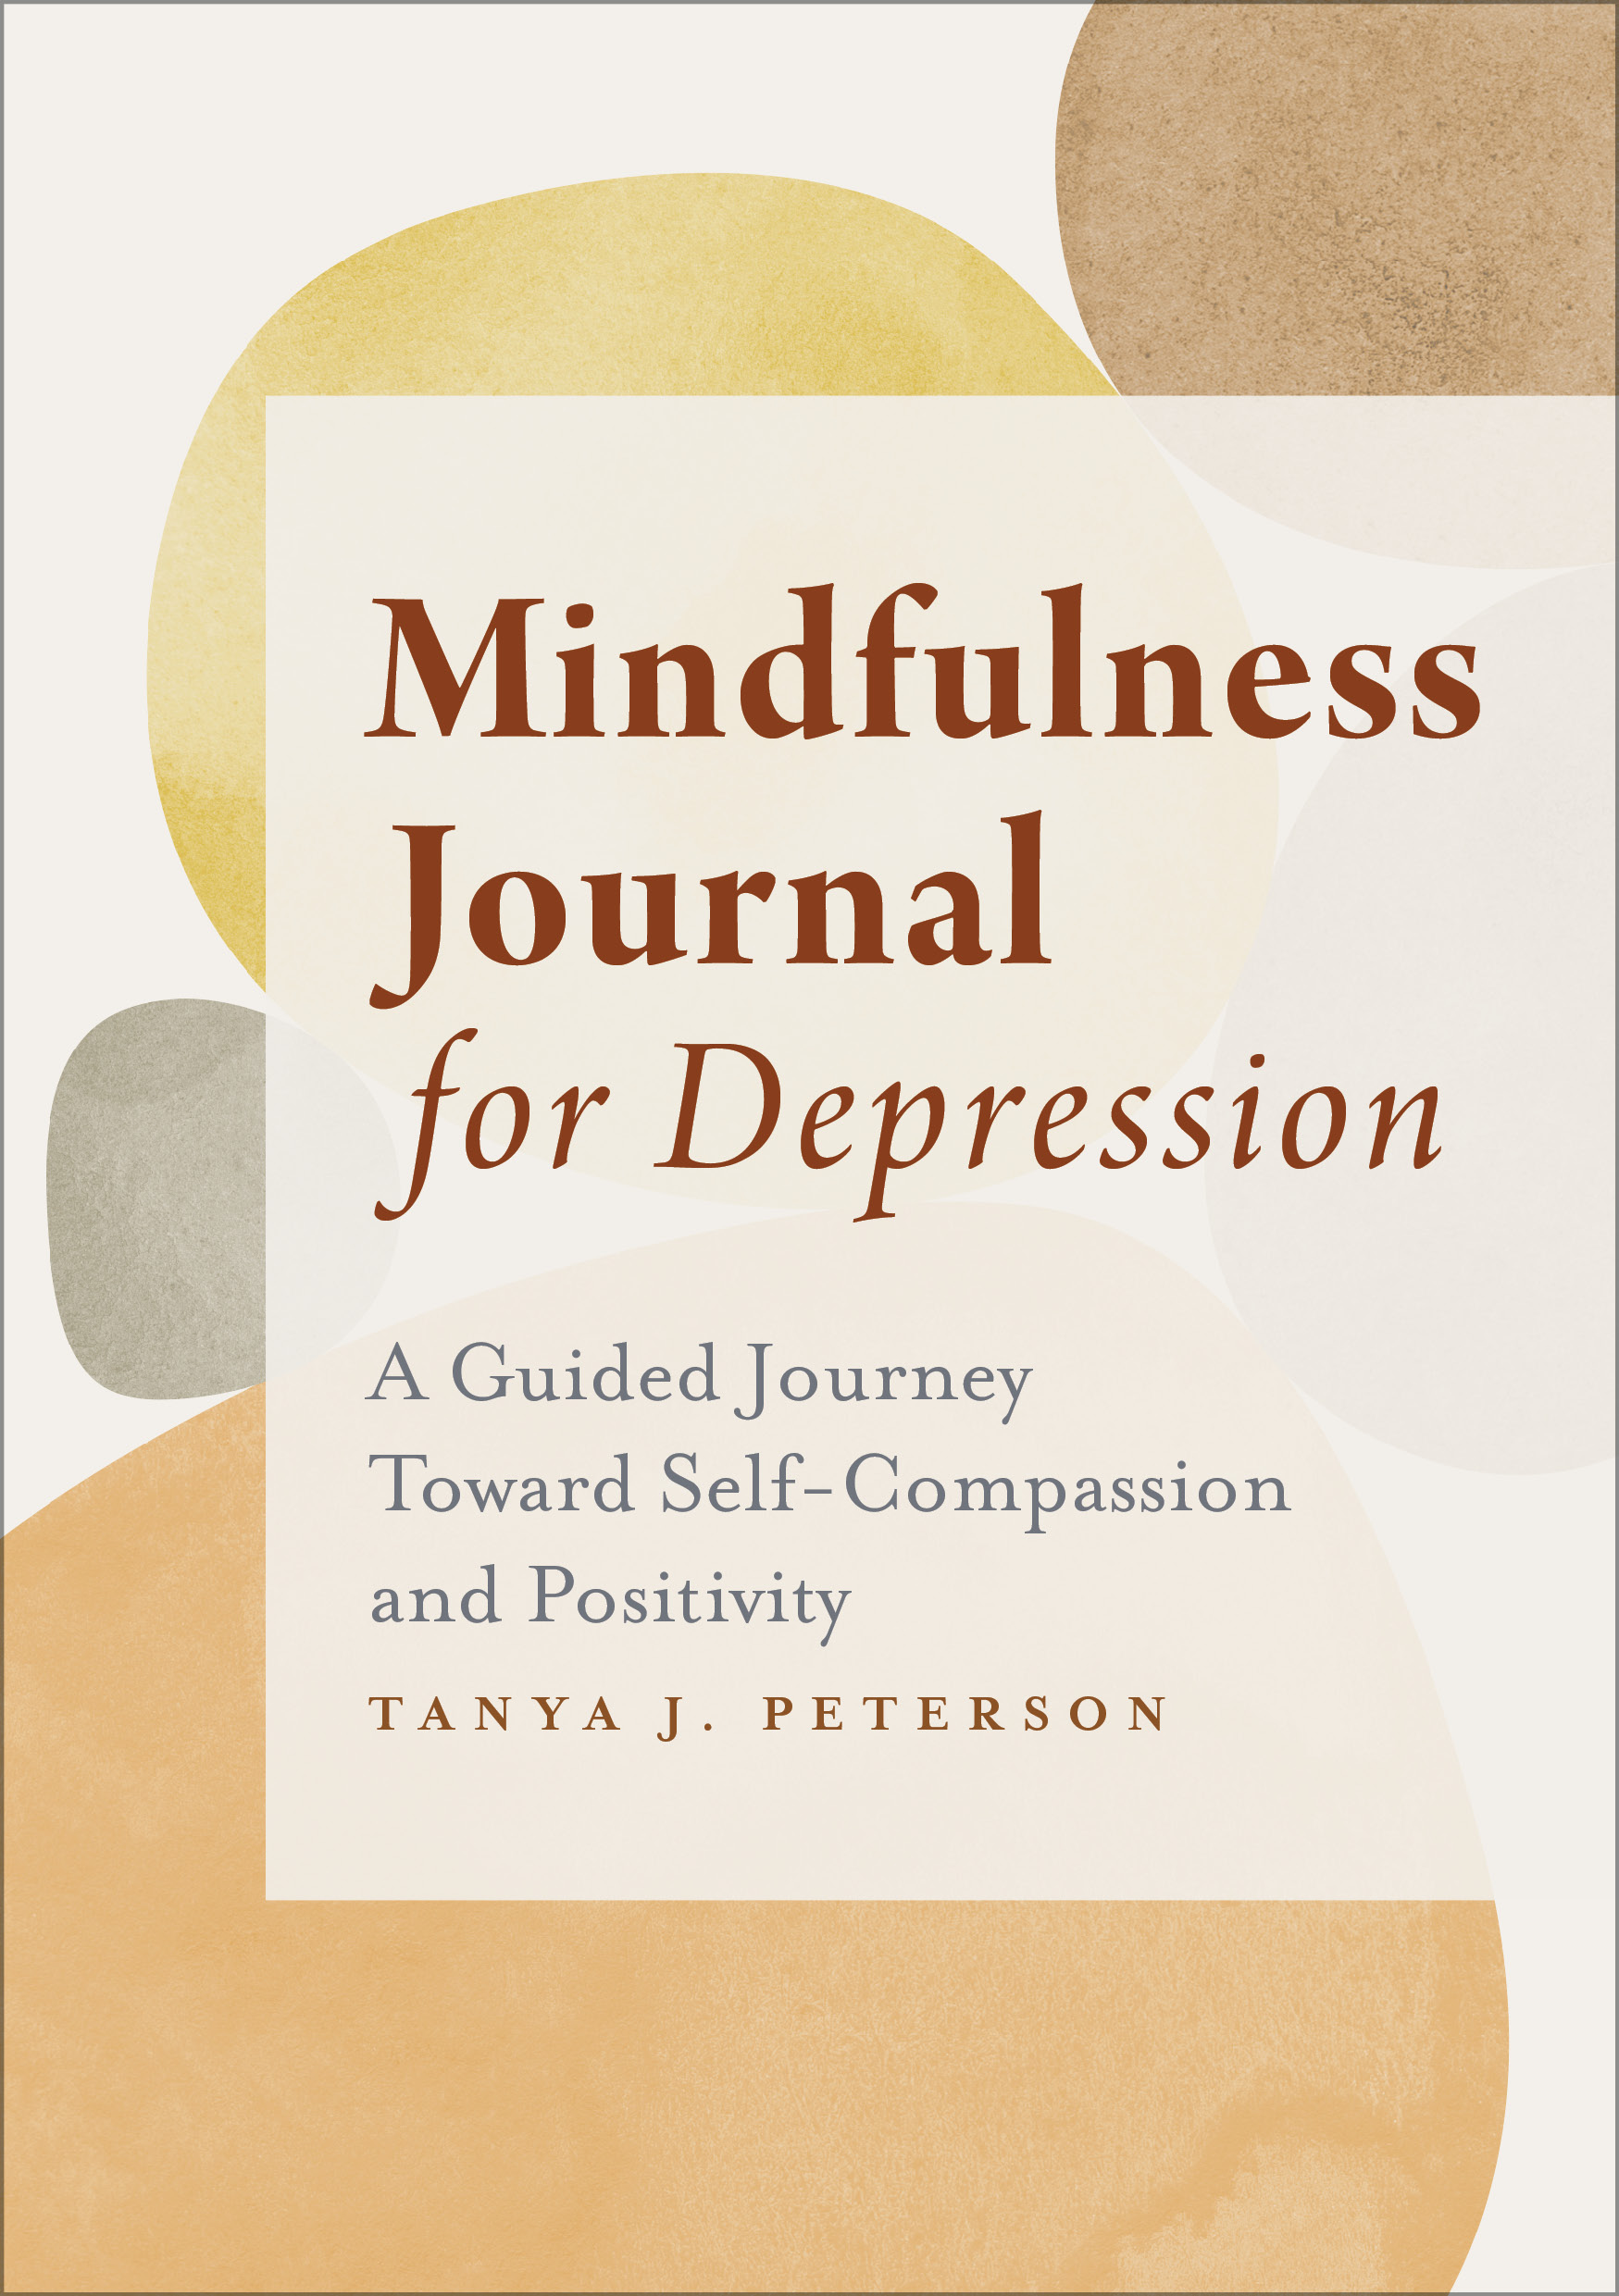 The Mindfulness Journal for Depression: A Guided Journey Toward Self-Compassion and Positivity